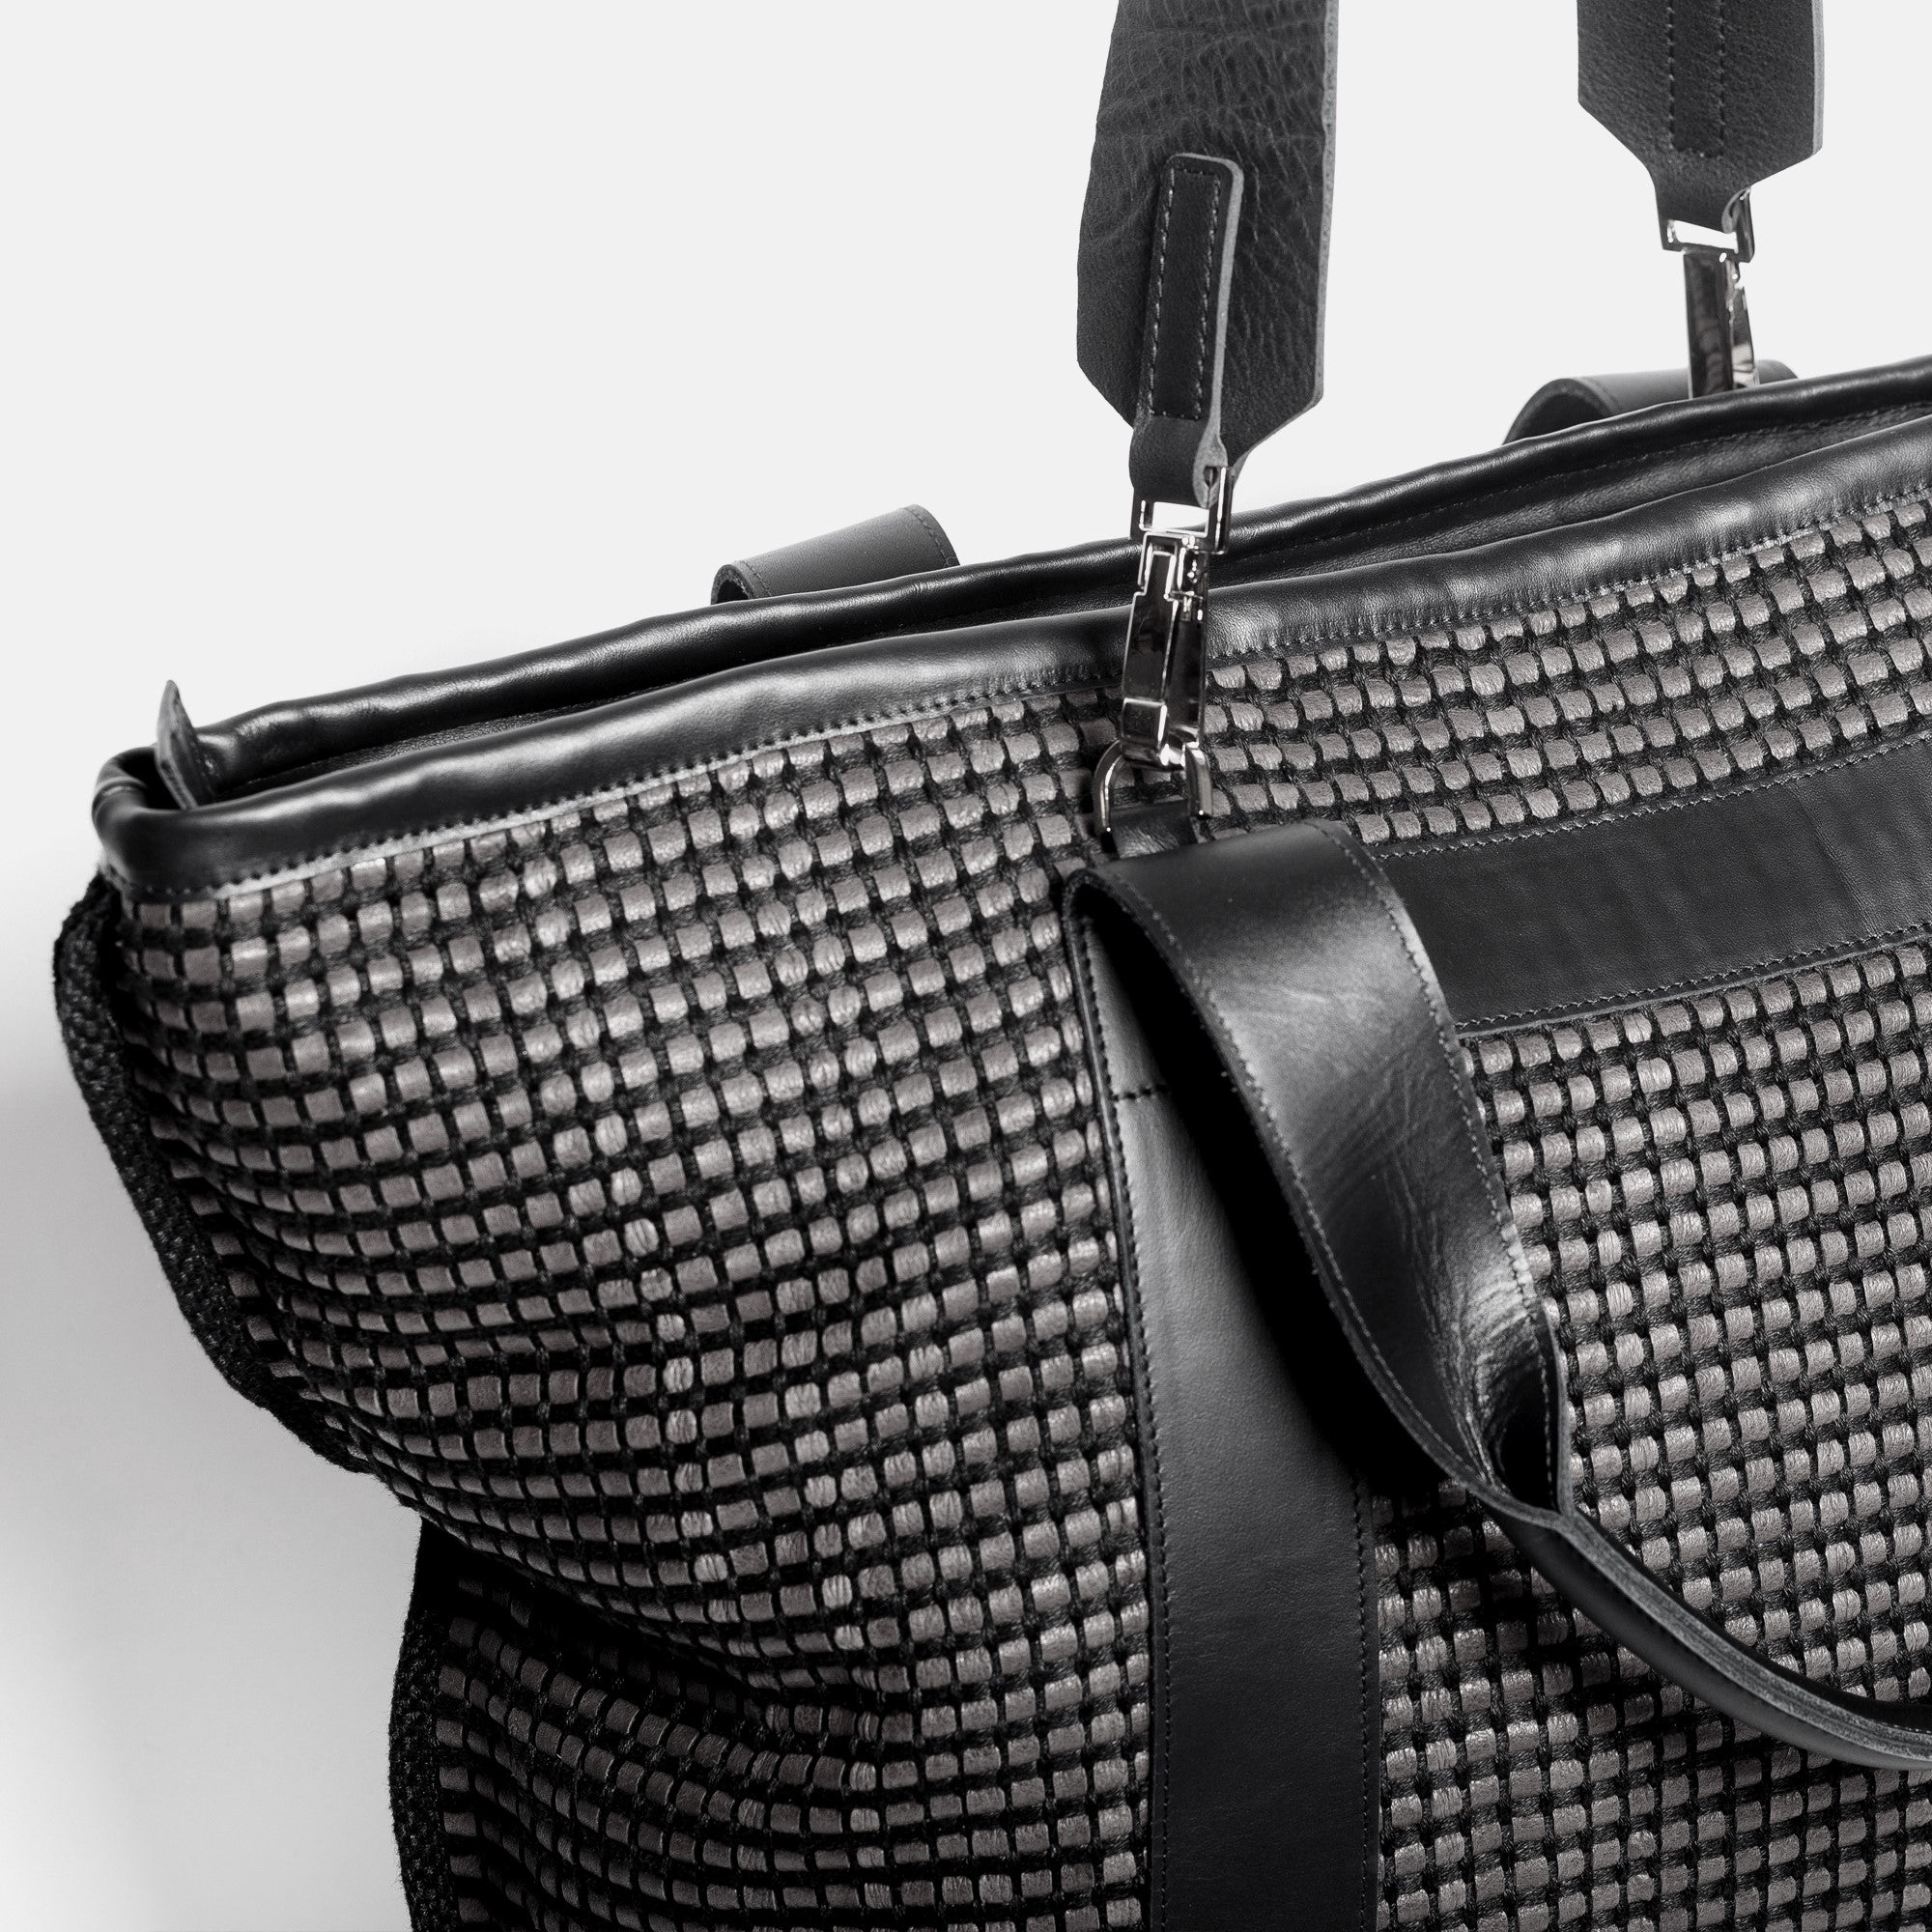 Handwoven Traveling Bag AUSTĖ #37 black leather and linen